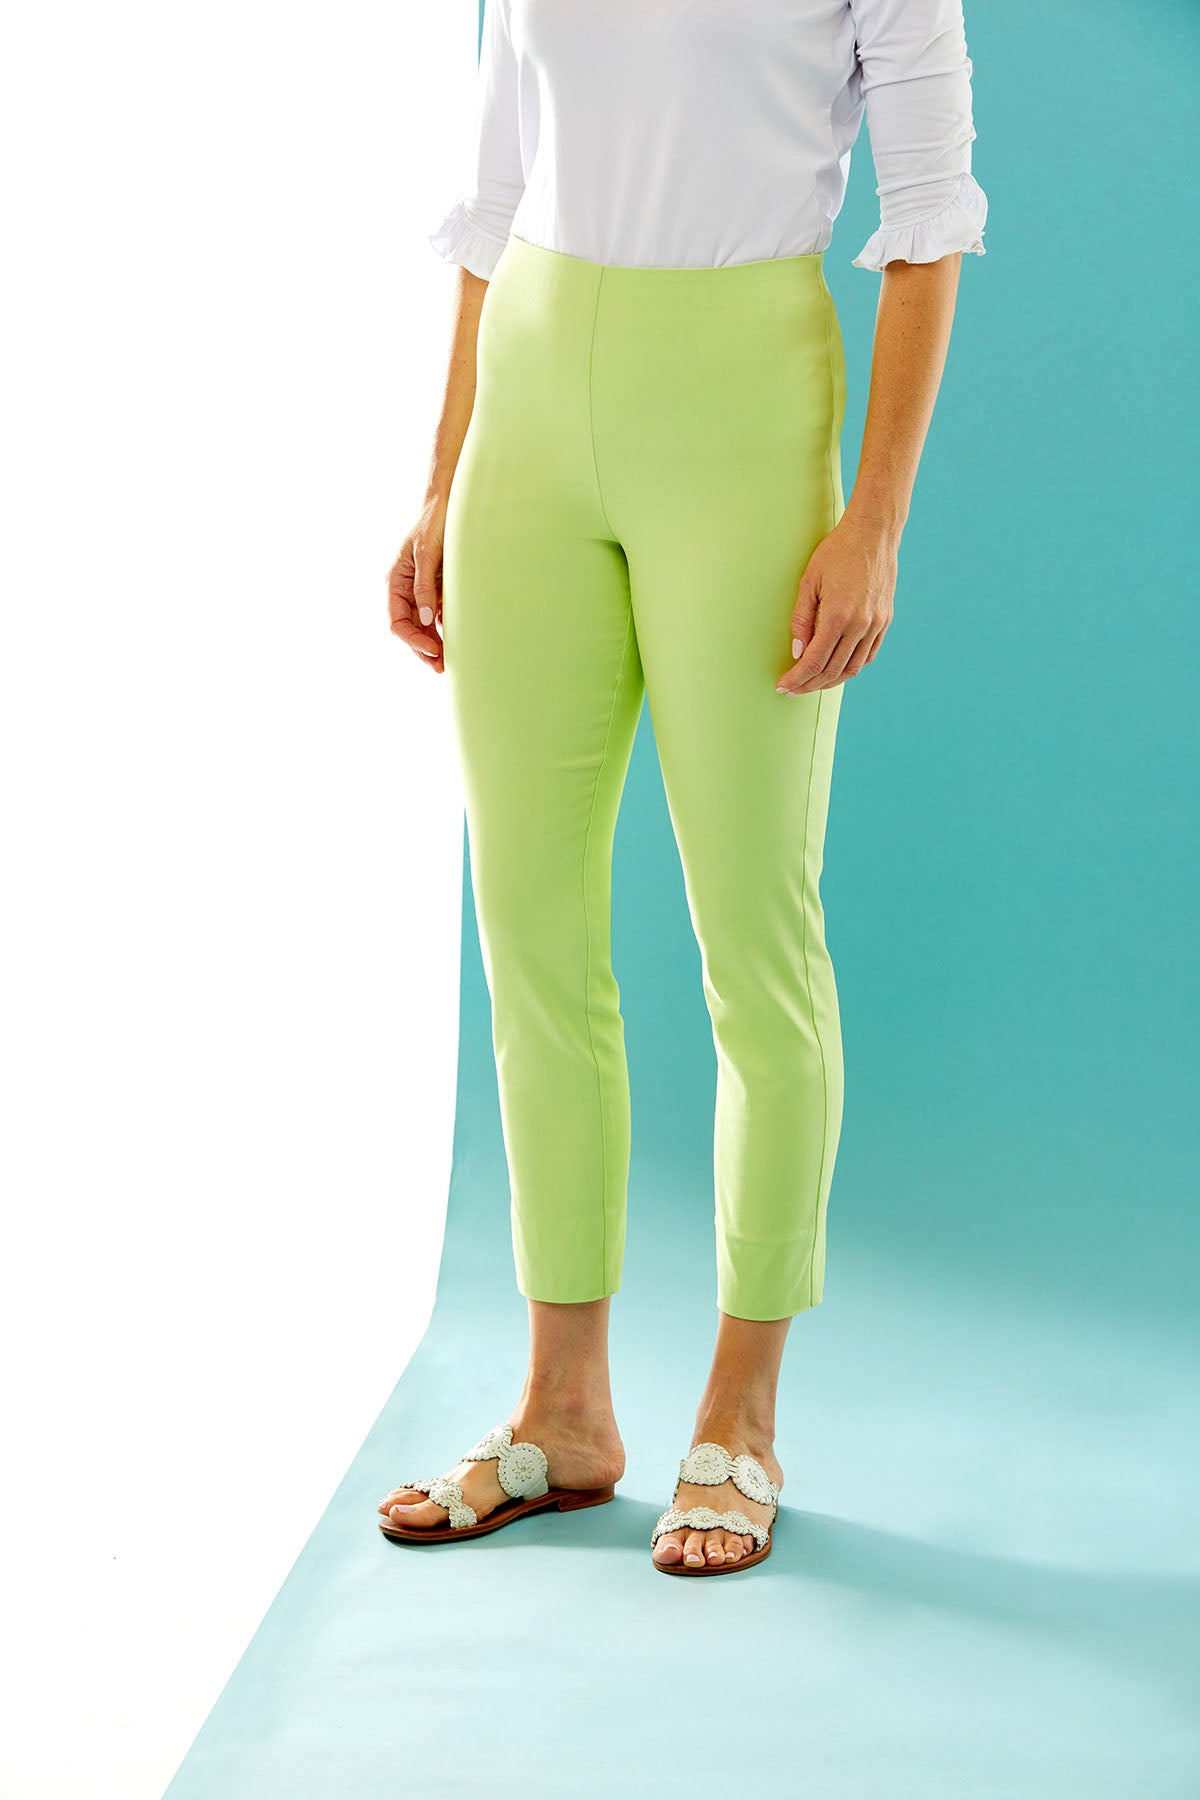 The best-selling Sara Campbell Sheri Pants in citrus